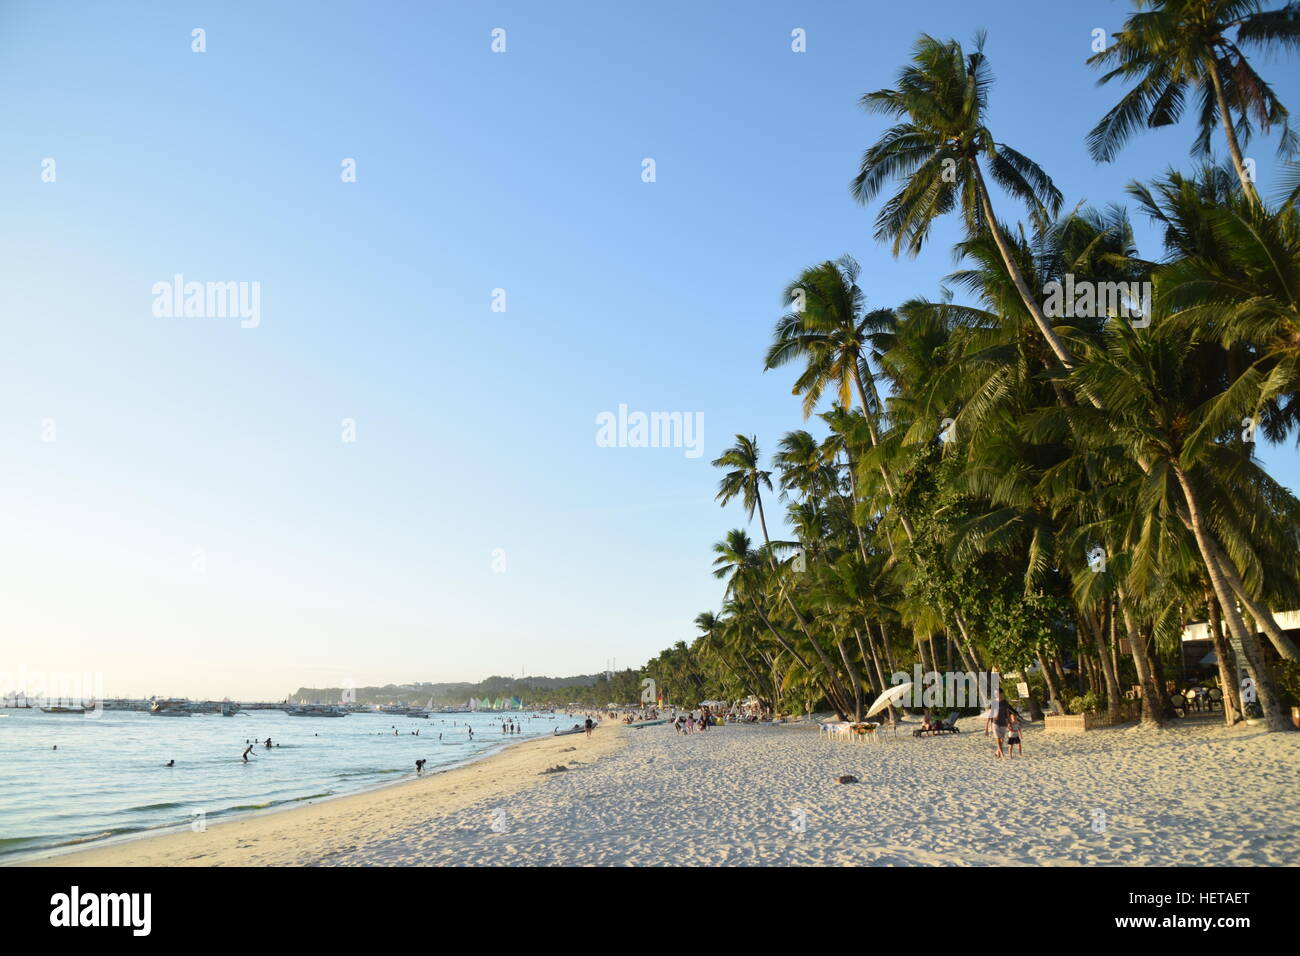 White beach, Boracay Island, Philippines Banque D'Images